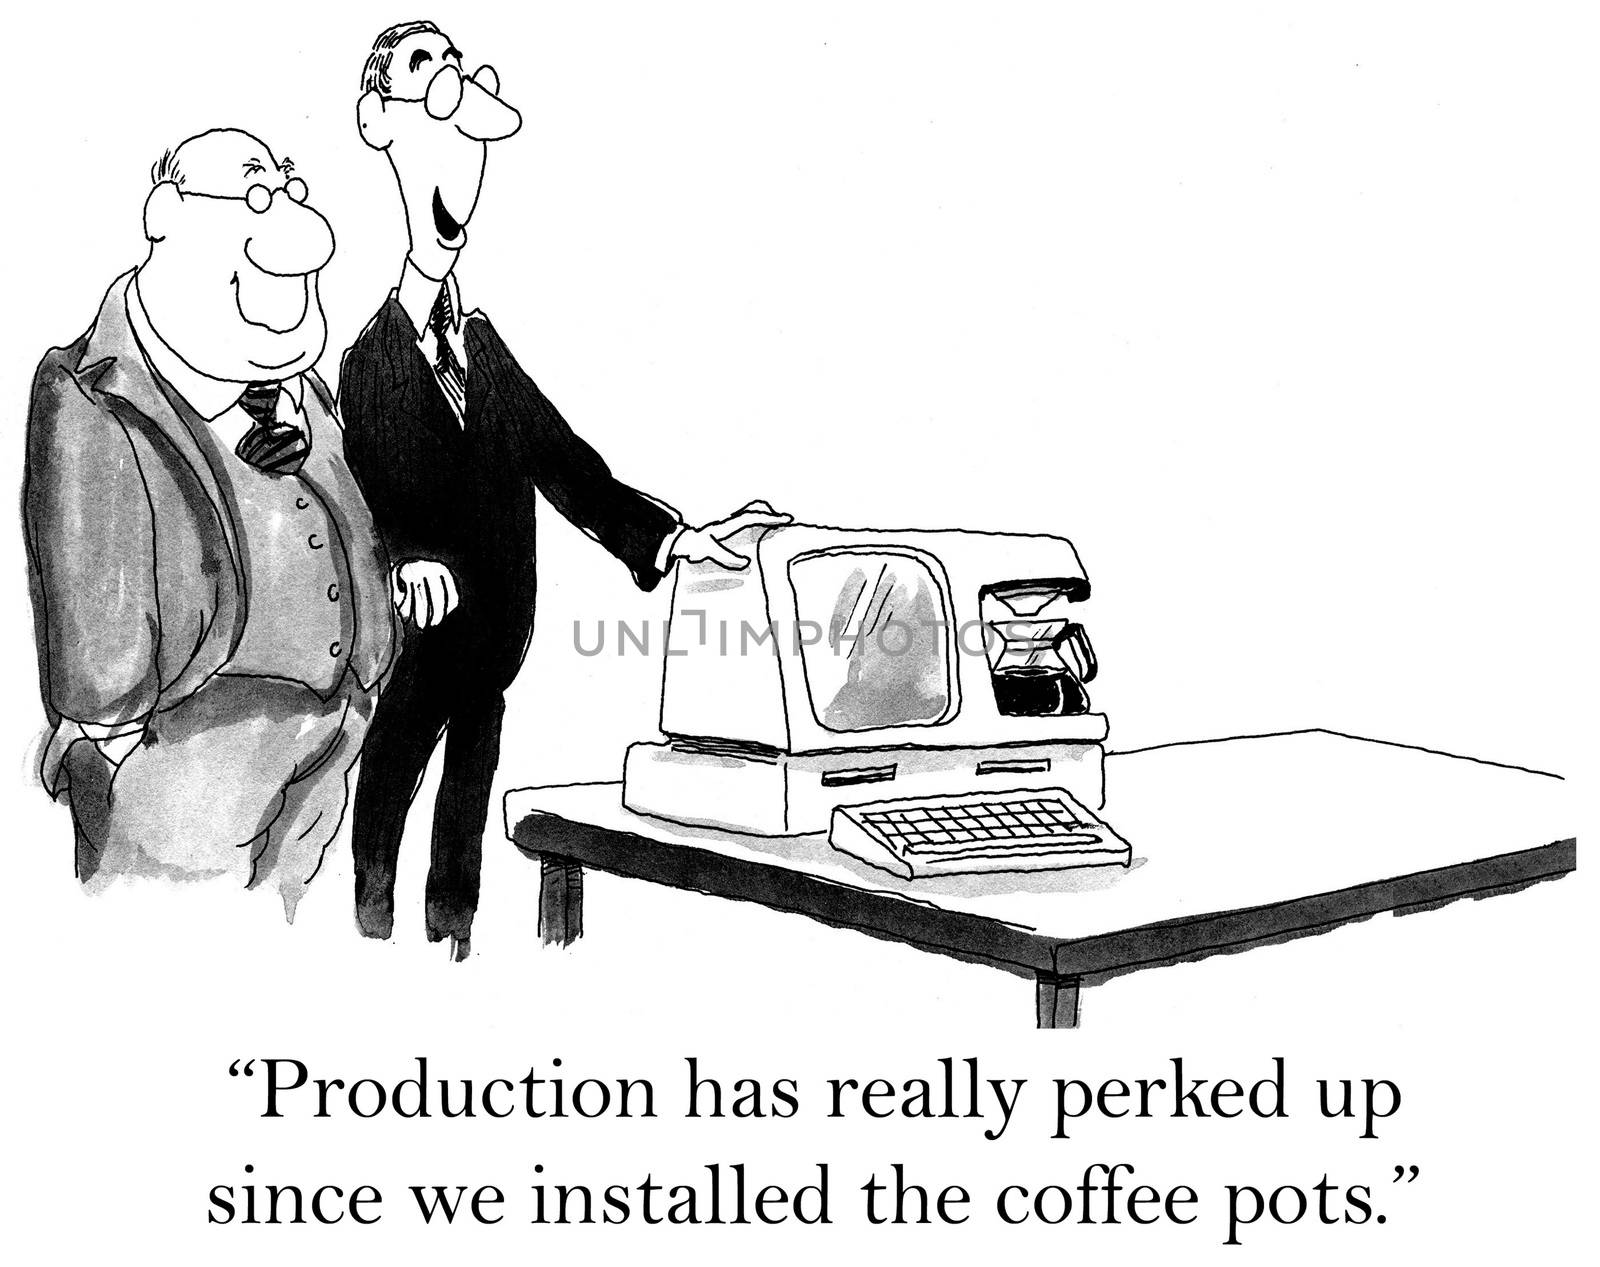 "Man, since we installed the coffeepots, production has REALLY perked up!"